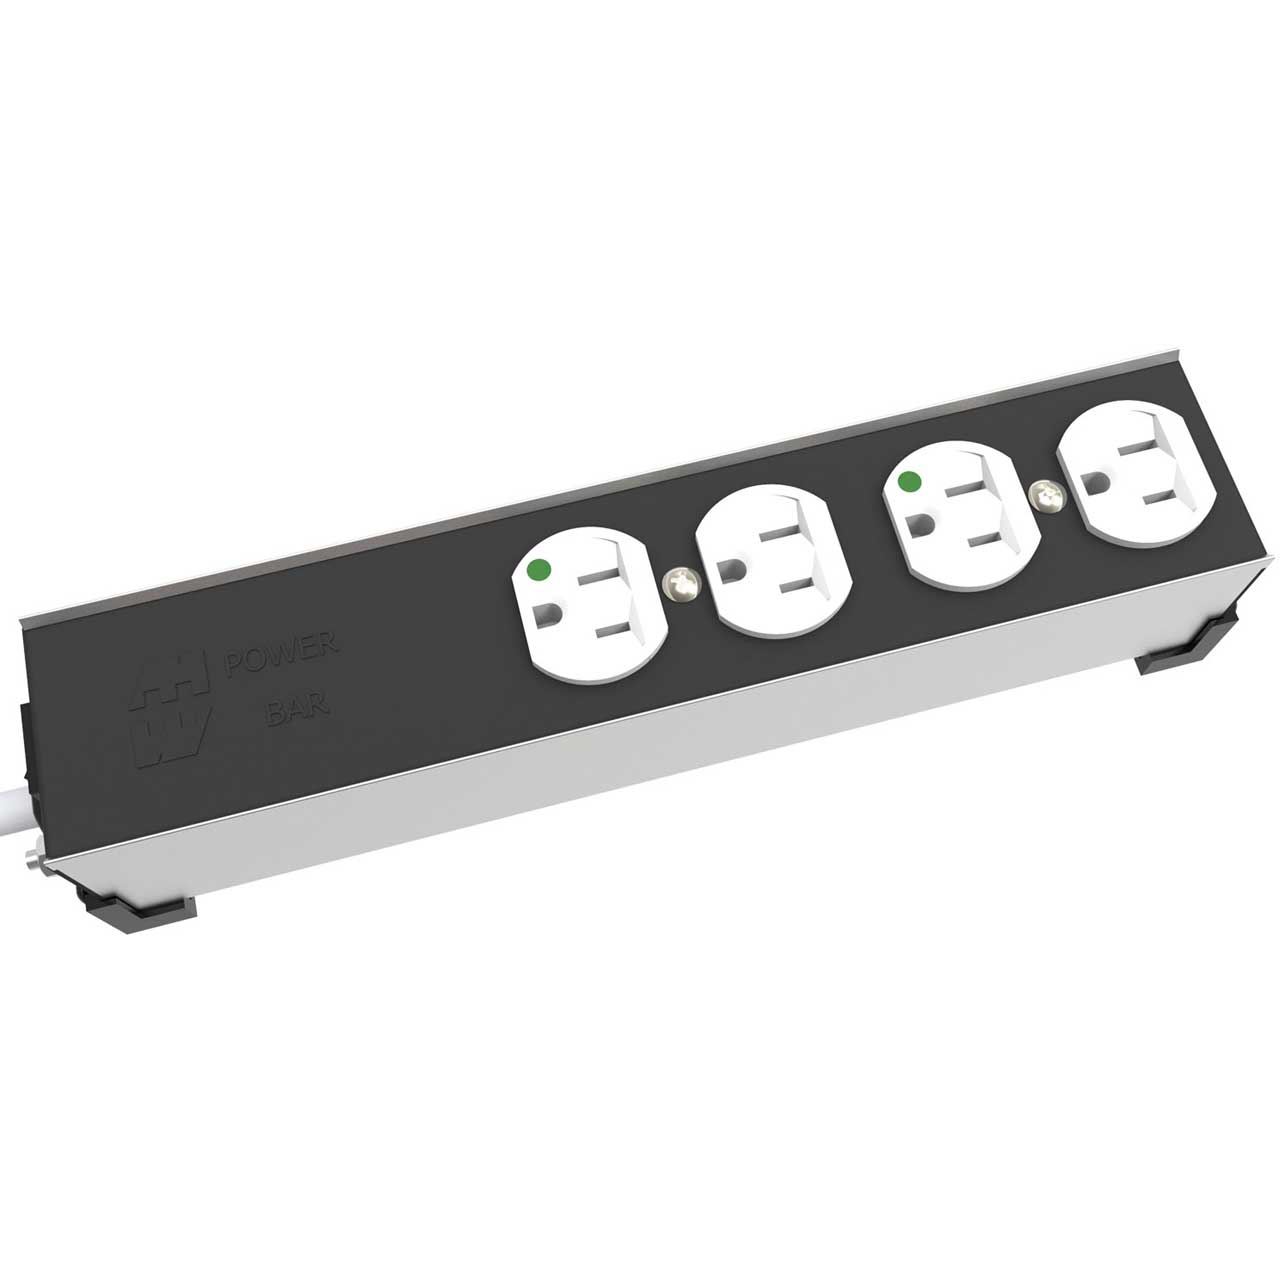 Hammond 1584T4DH Medical 15A H.D. - 4 Outlet Strip - 12 Foot Cord - Outlets Front - Black HMND-1584T4DH